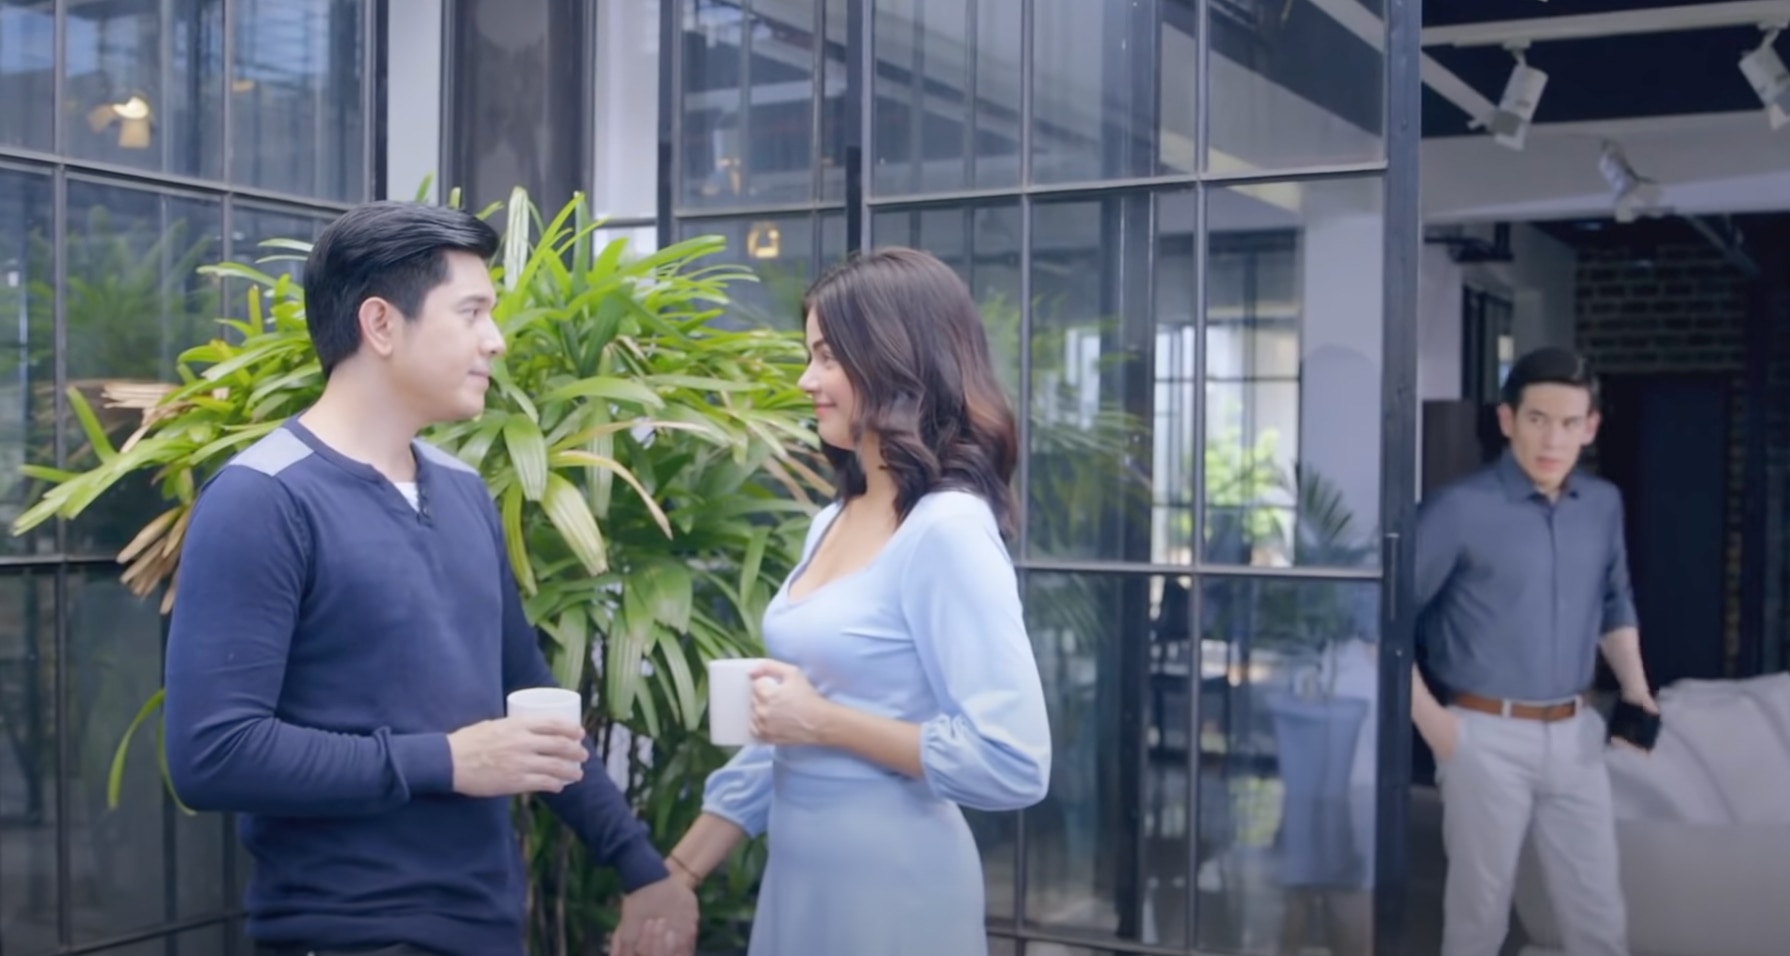 Cedric (Jake Ejercito) catches Andrei and Camille (Paulo Avelino and Janine Gutierrez) holding hands